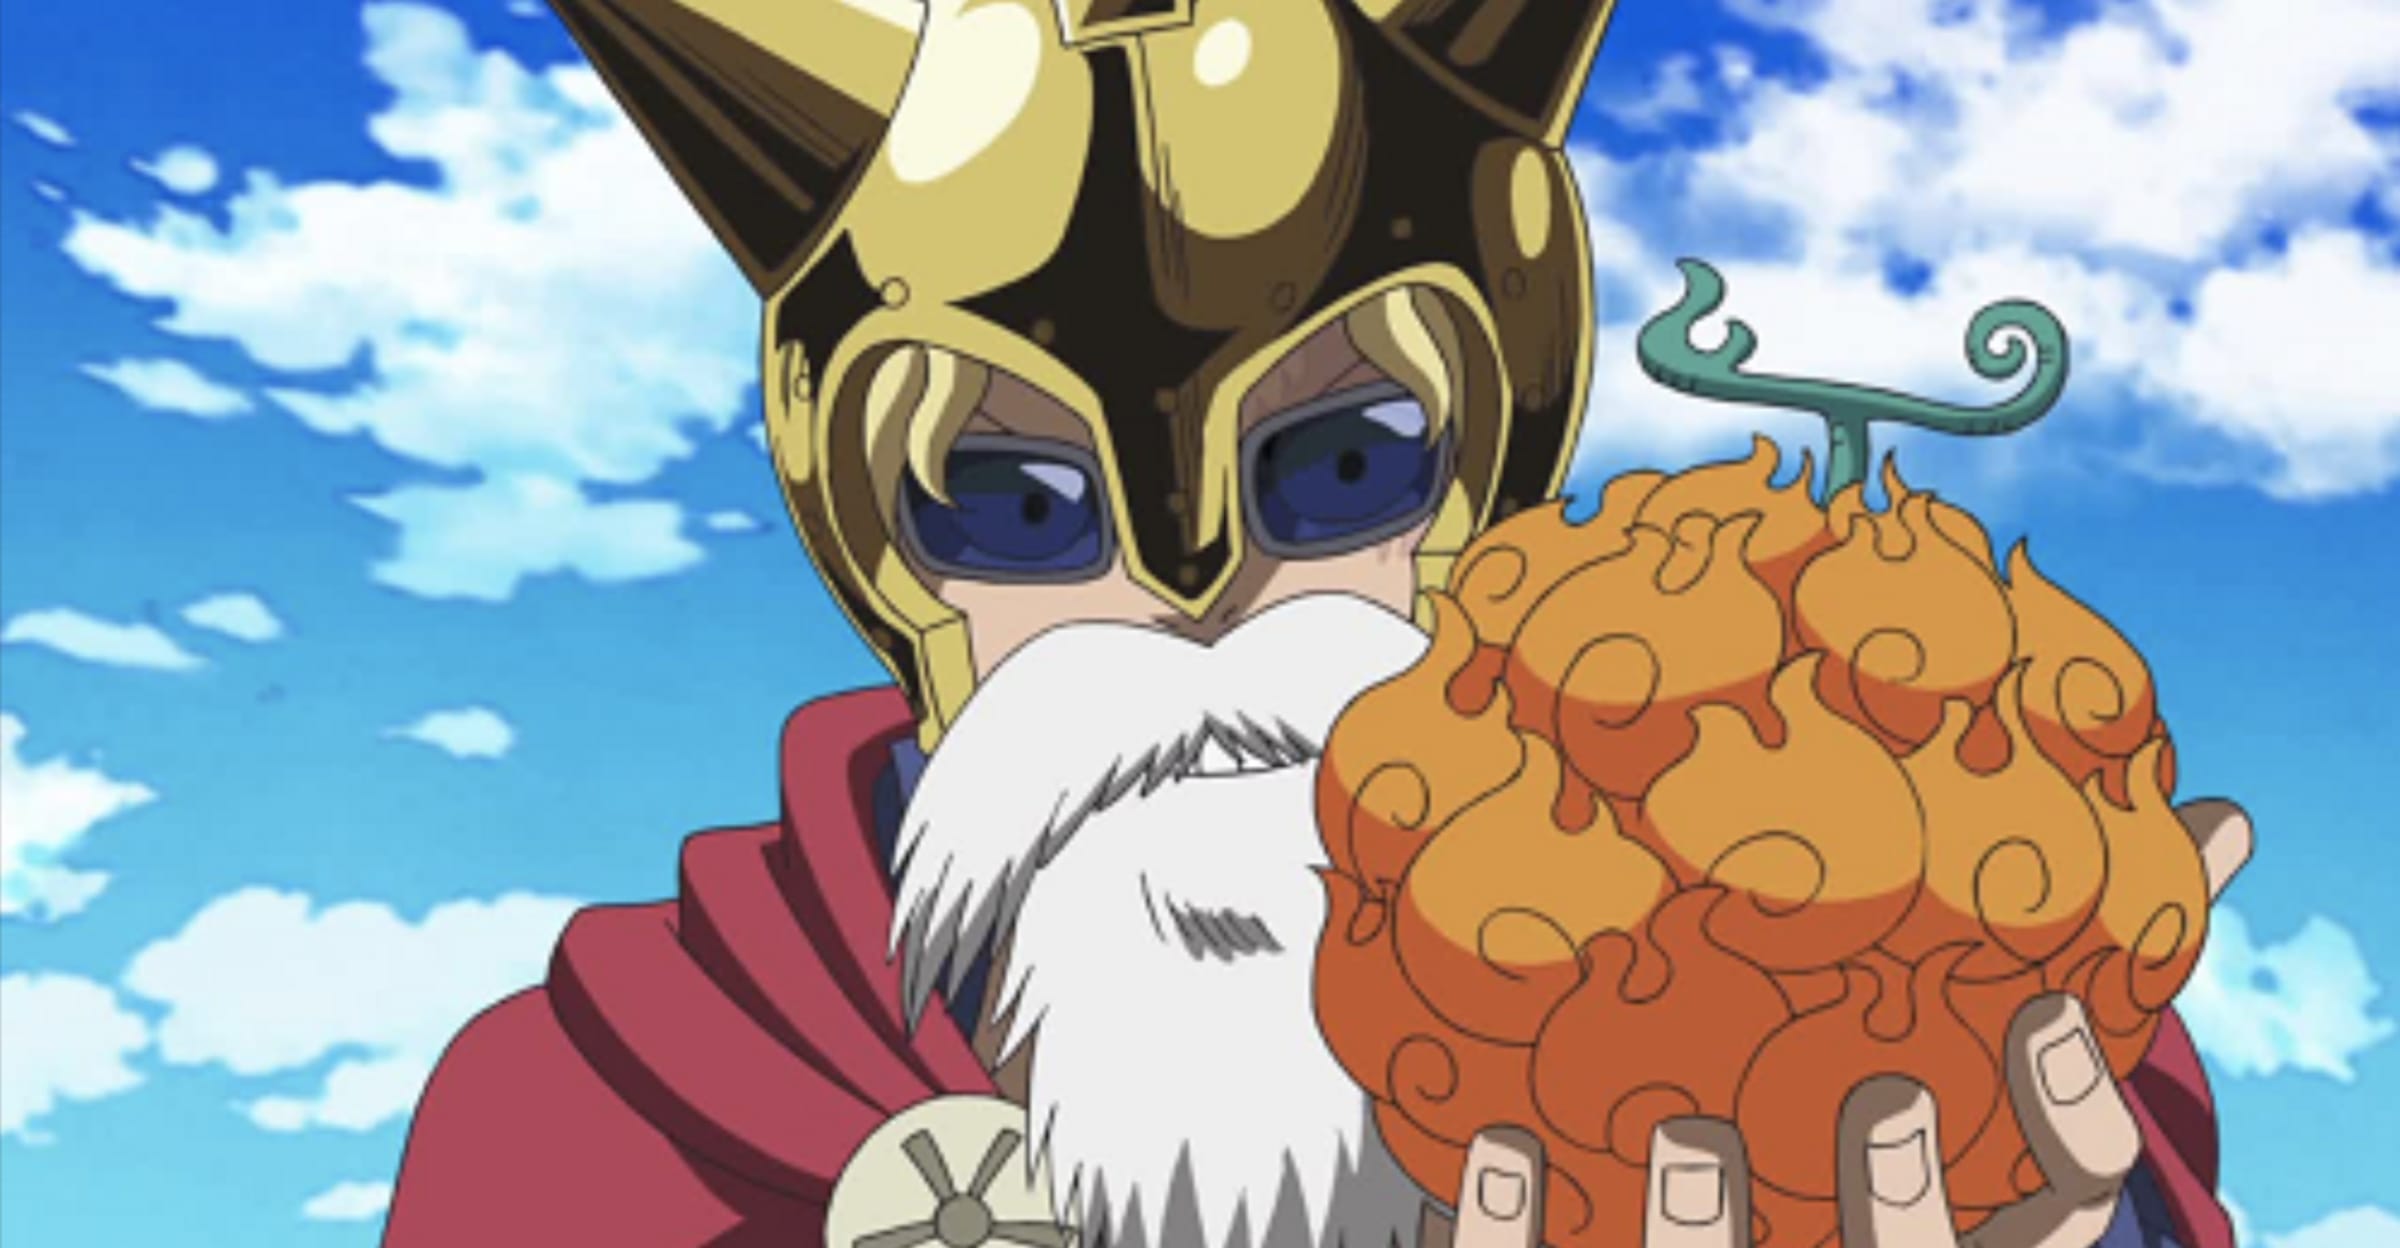 How did Blackbeard get his second Devil Fruit power? Why didn't he